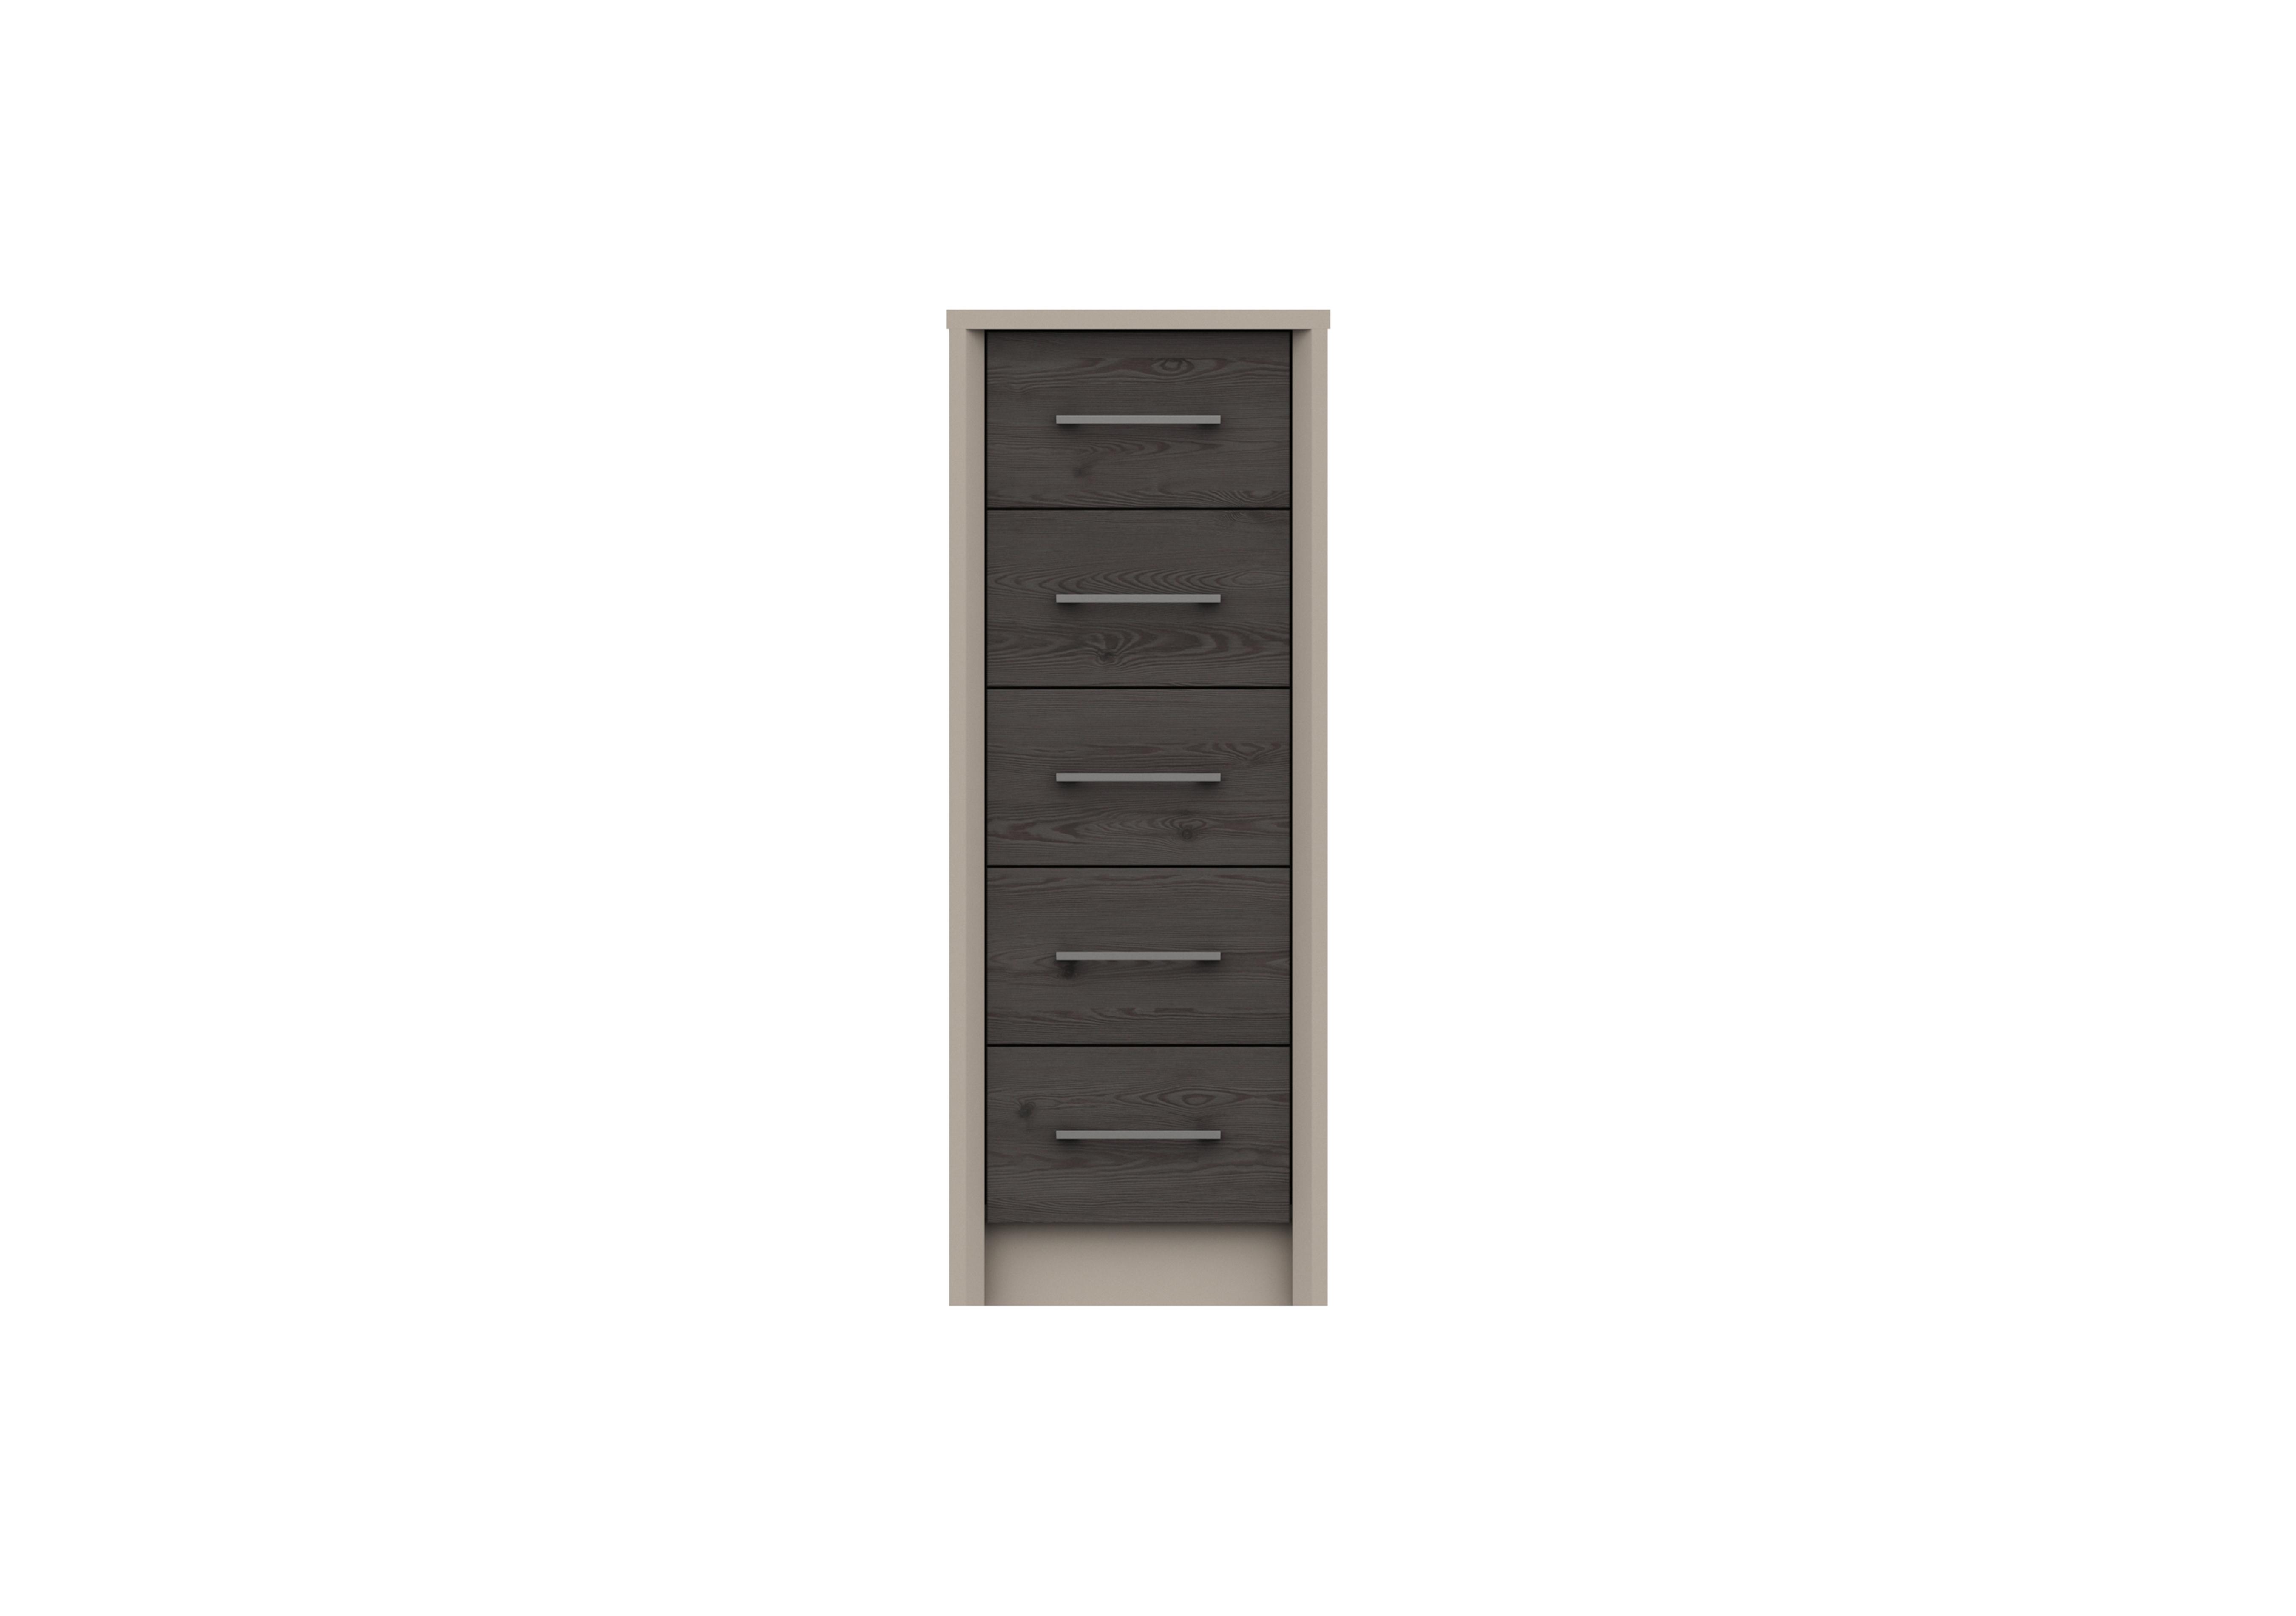 Paddington 5 Drawer Narrow Chest in Fired Earth/Anthracite Larch on Furniture Village